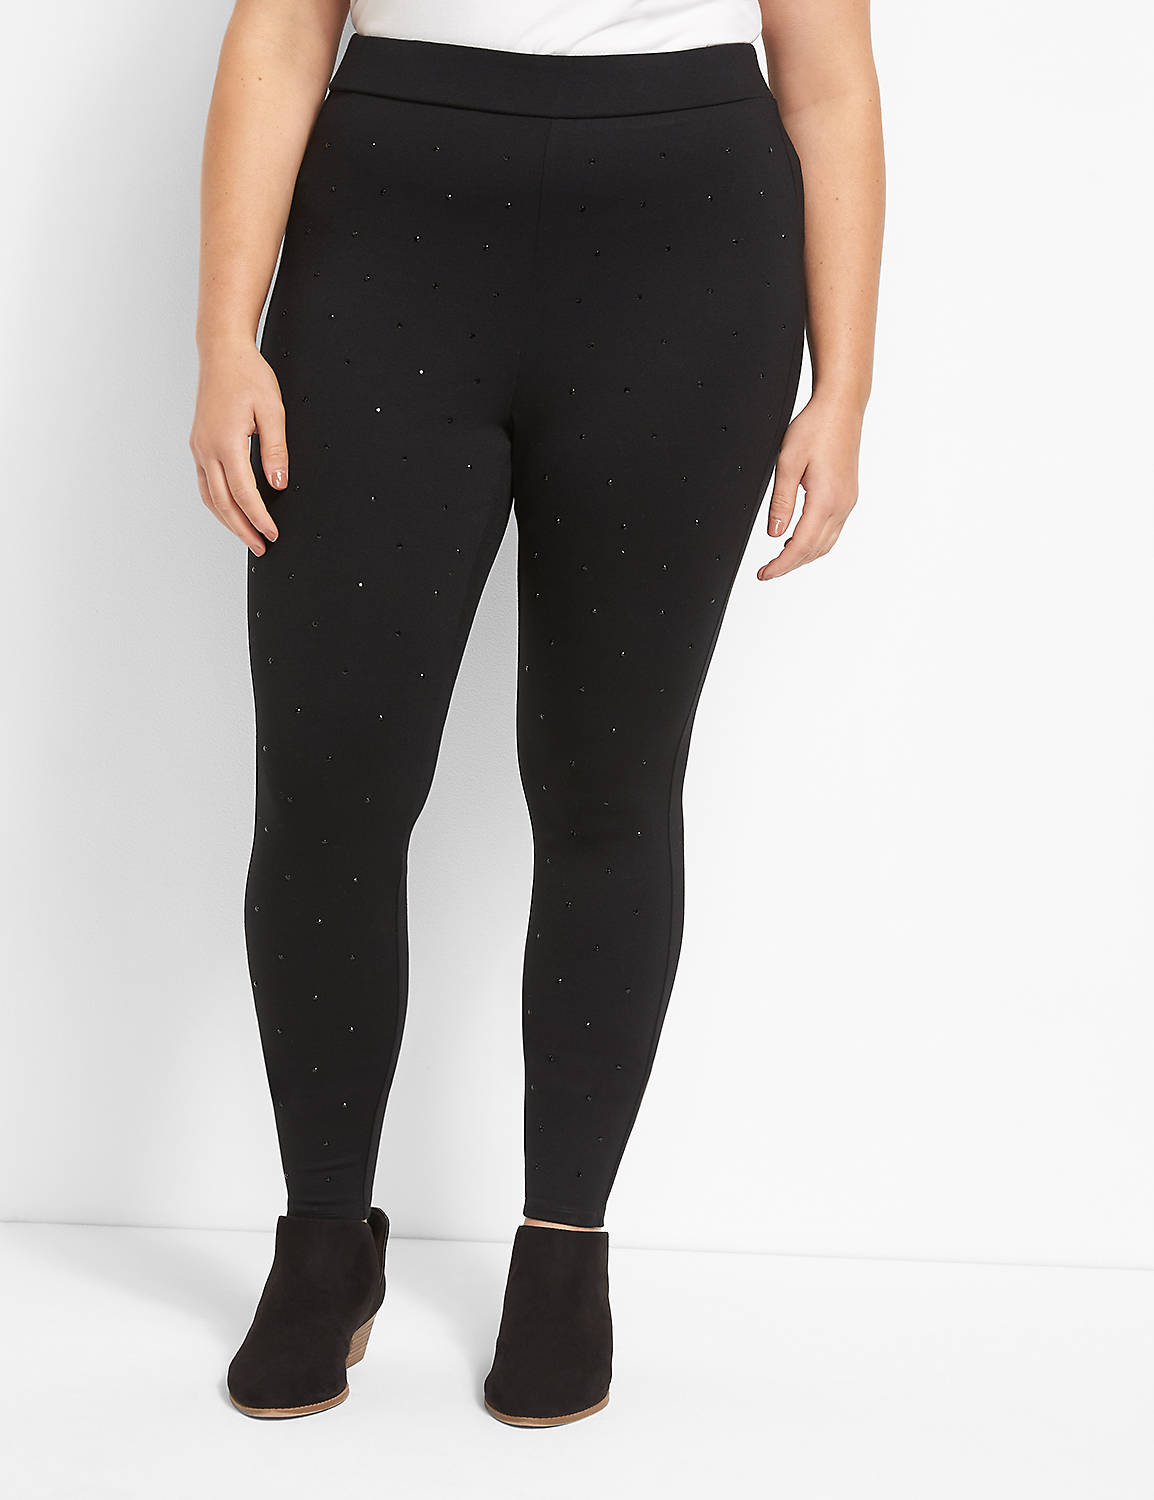 Pull-On High-Rise Ponte Legging With Rhinestones Product Image 1